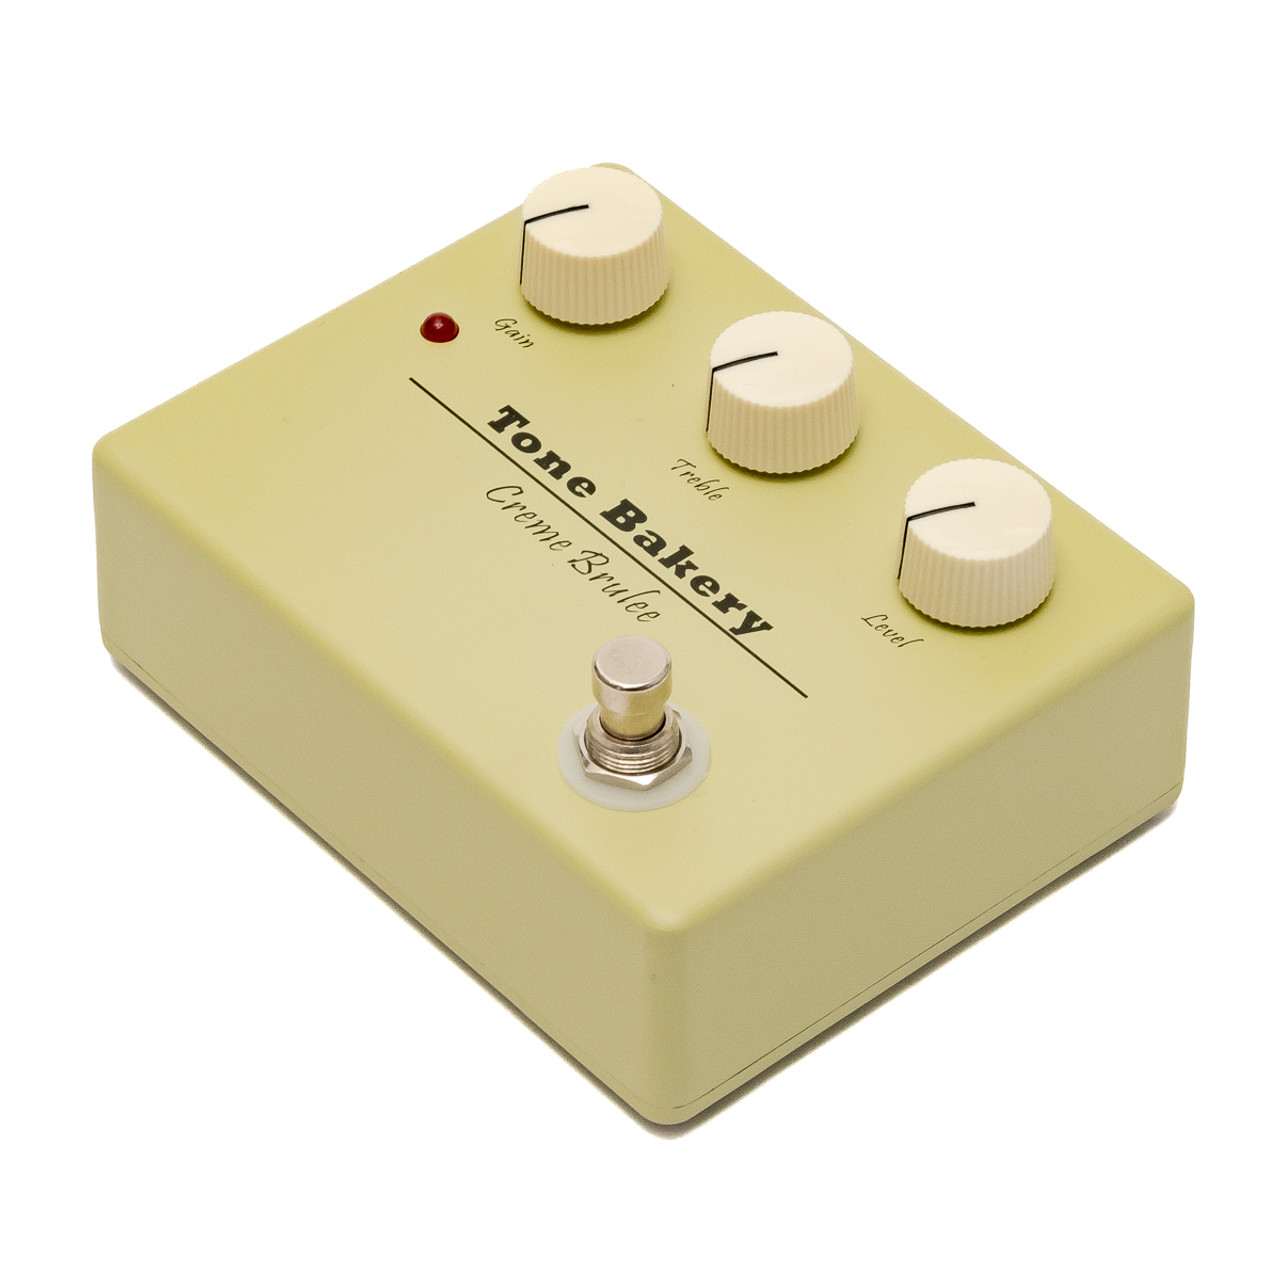 Tone Bakery - Creme Brulee - Guitar Overdrive Pedal - x0461 - USED